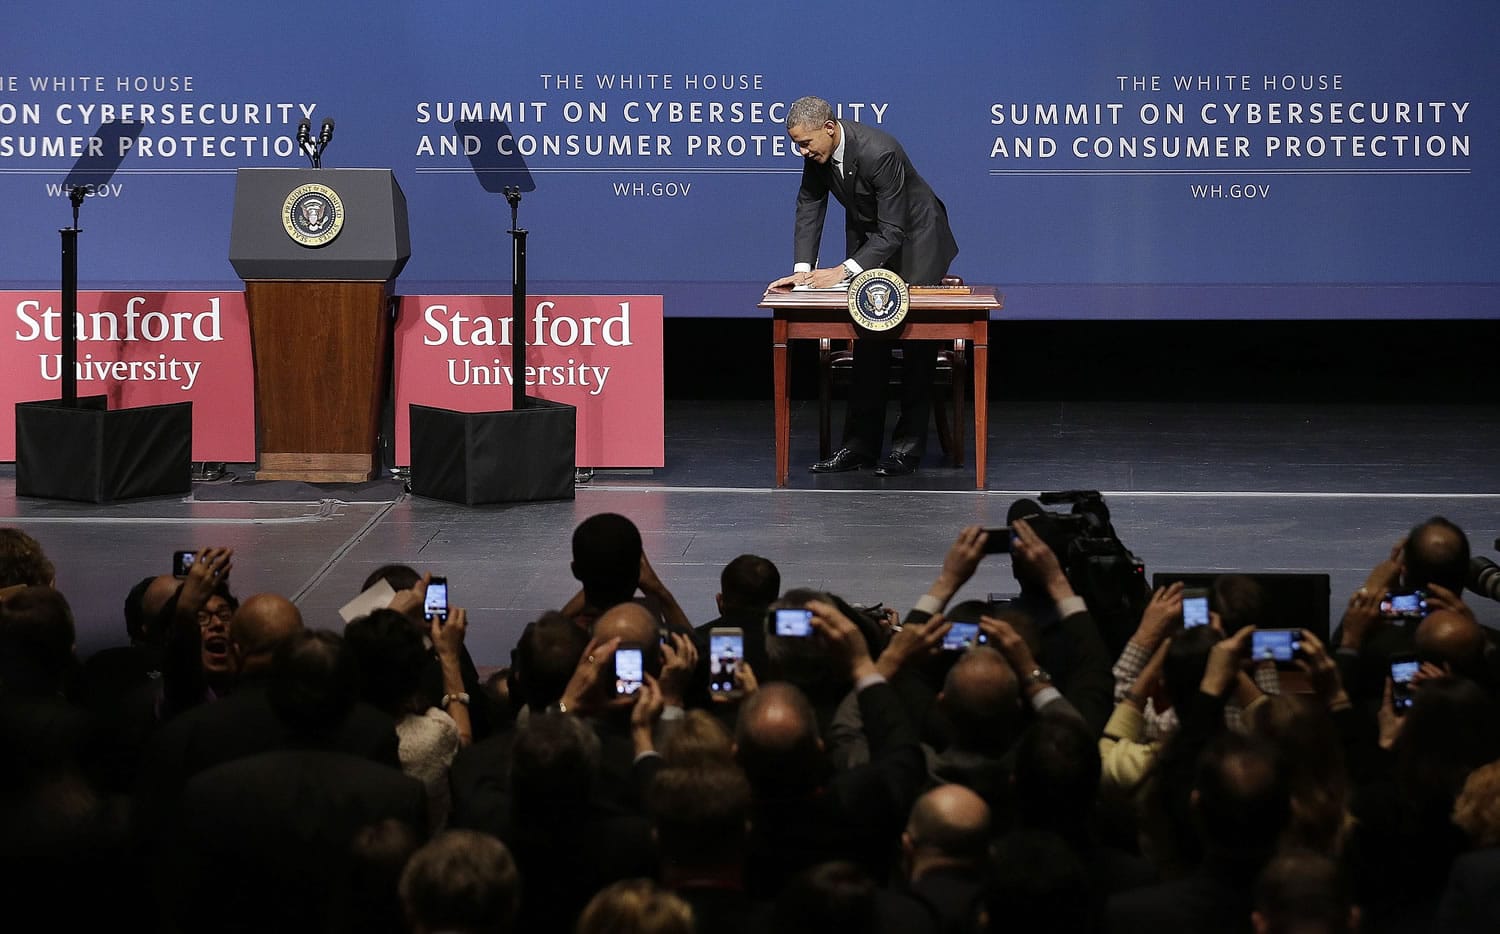 President Barack Obama signs an executive order to encourage and promote sharing of cybersecurity threat information within the private sector and between the private sector and government, after speaking Friday at the White House Summit on Cybersecurity and Consumer Protection in Stanford, Calif.